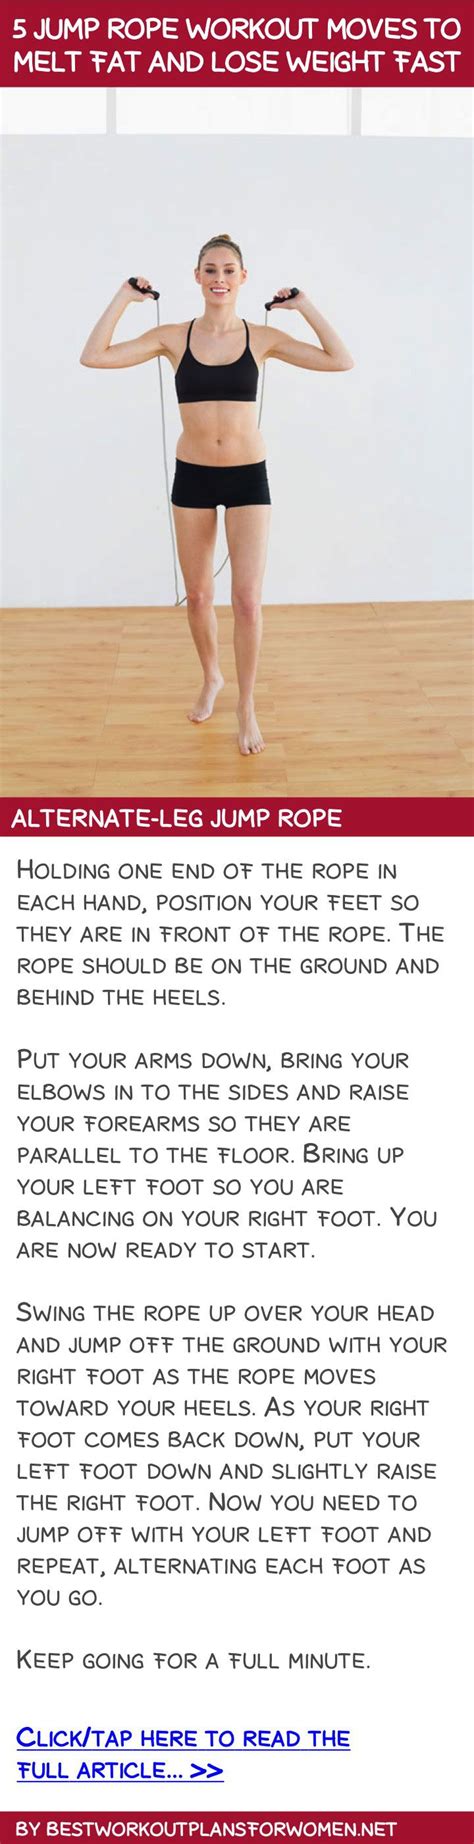 It gets your heart rate up in a short amount of time and is one of the best ways to get your blood pumping. 5 jump rope workout moves to melt fat and lose weight fast - Alternate-leg jump rope | Fitness ...